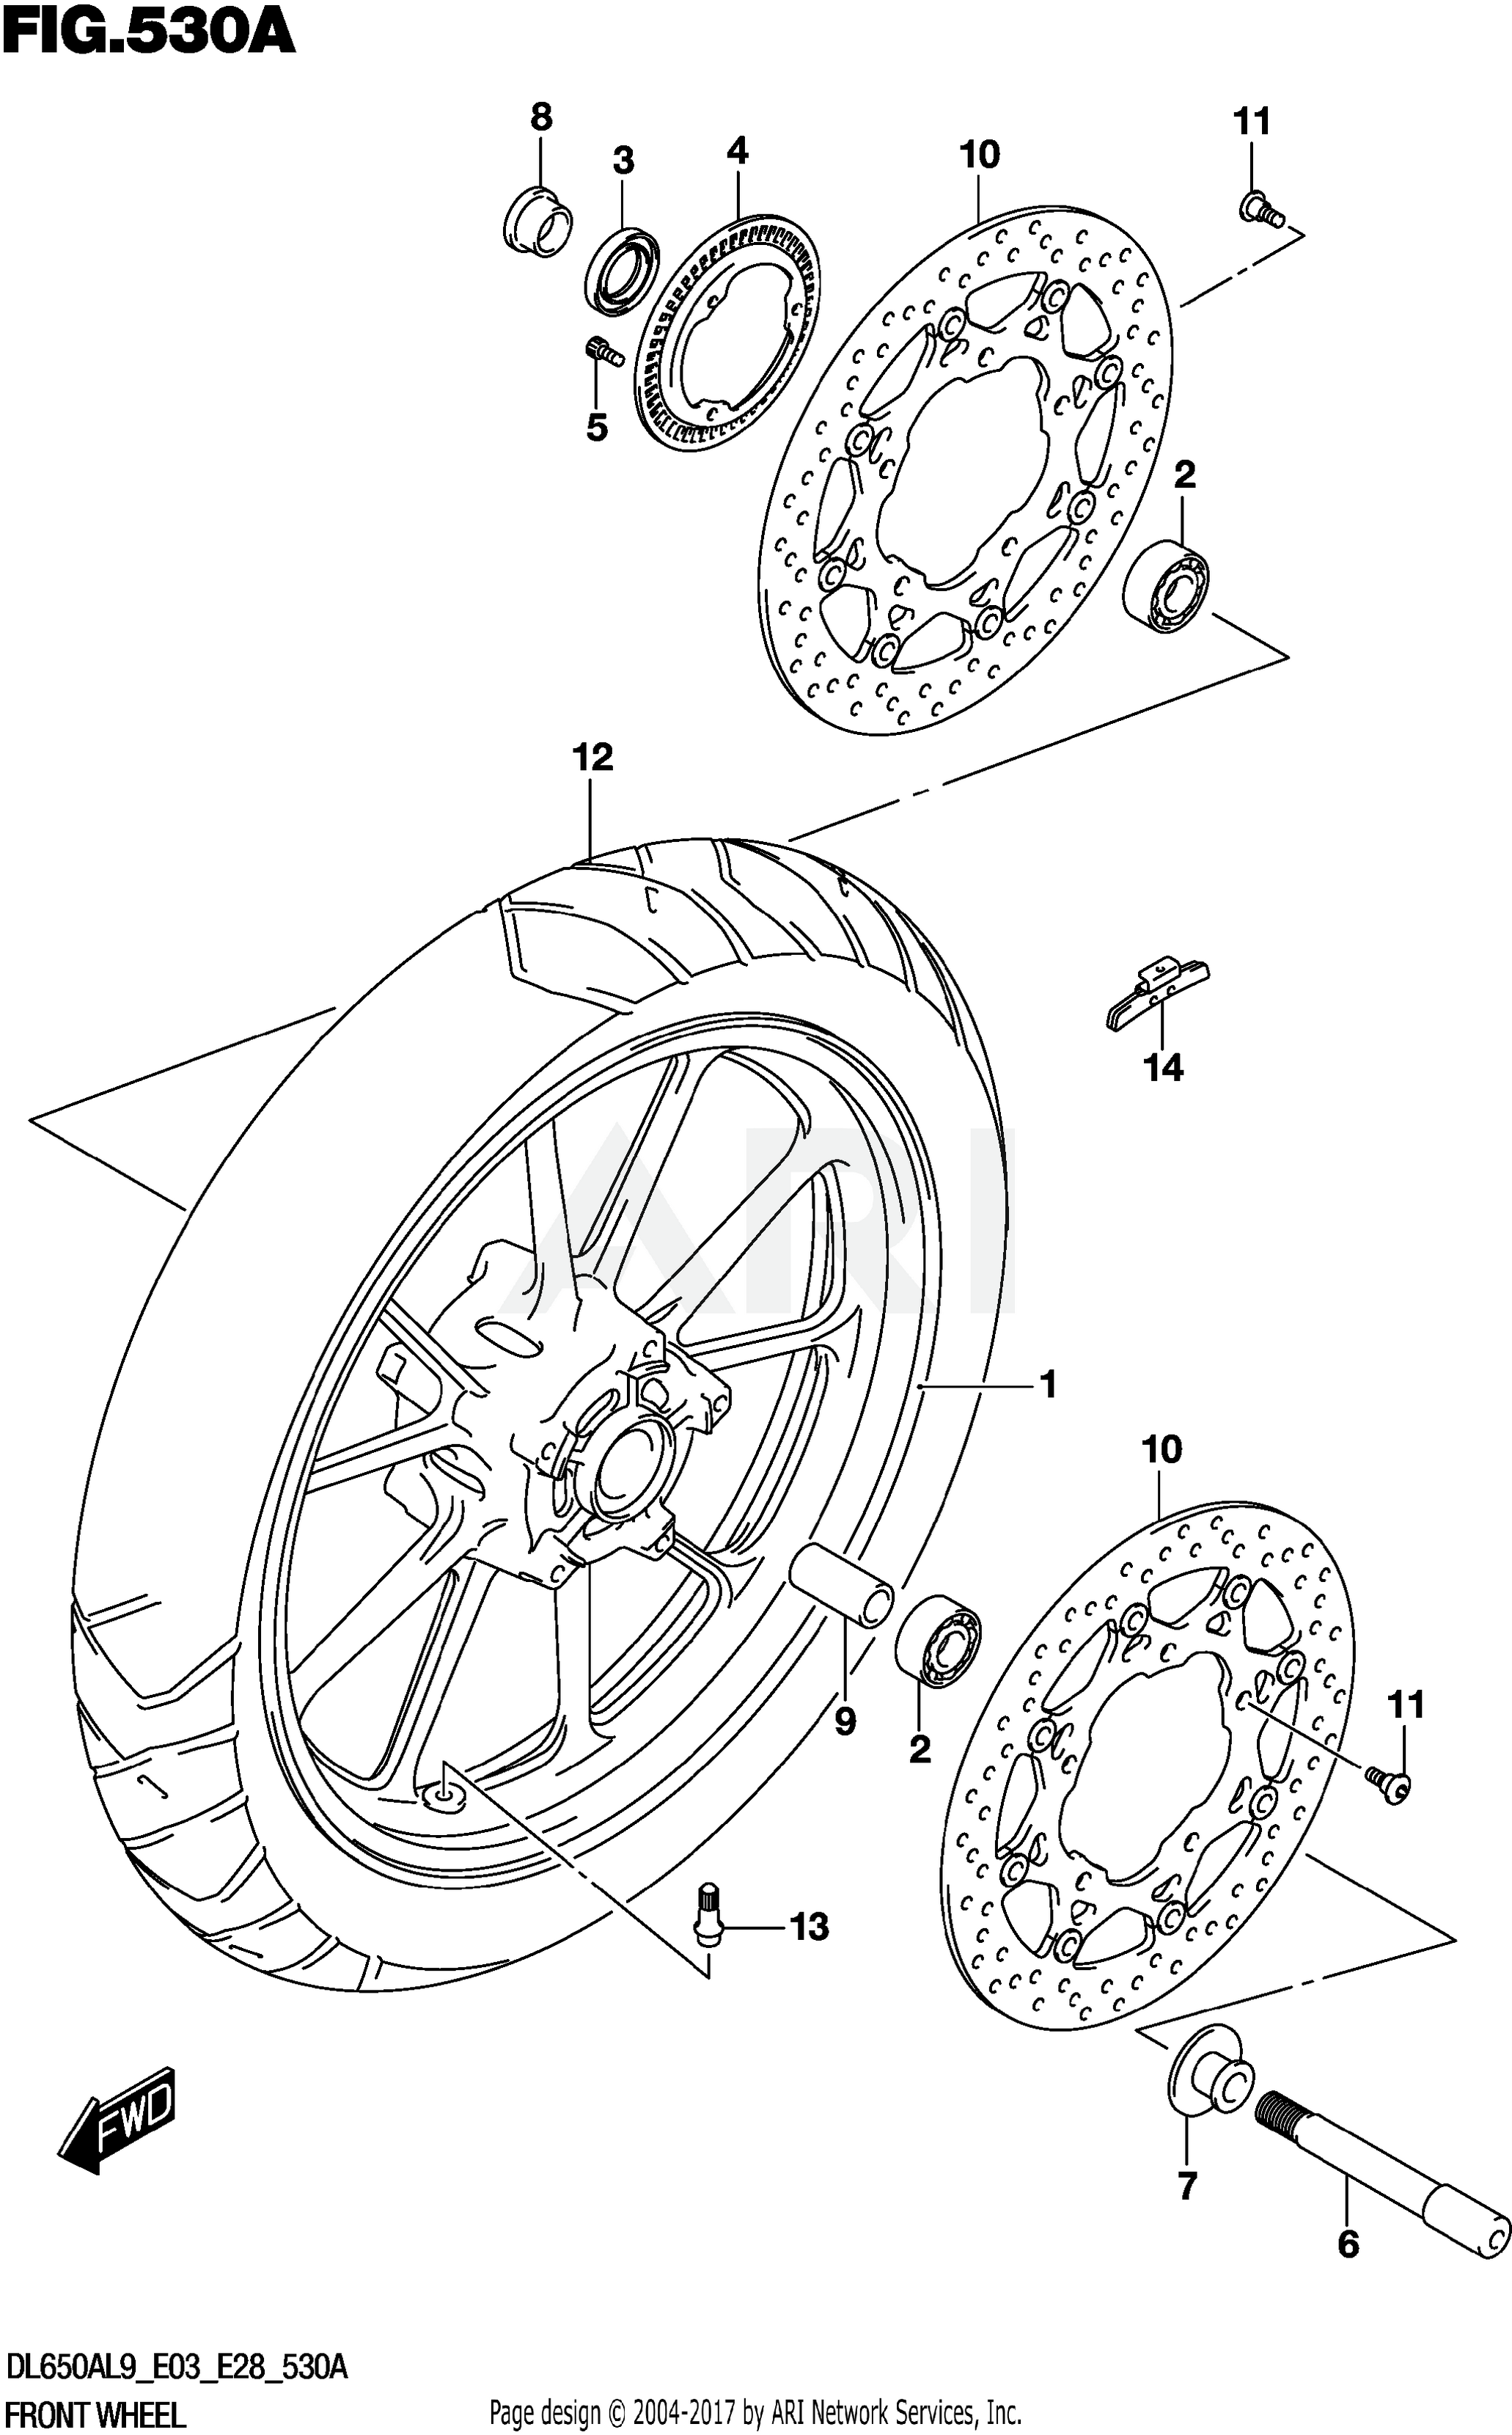 FRONT WHEEL (DL650A)